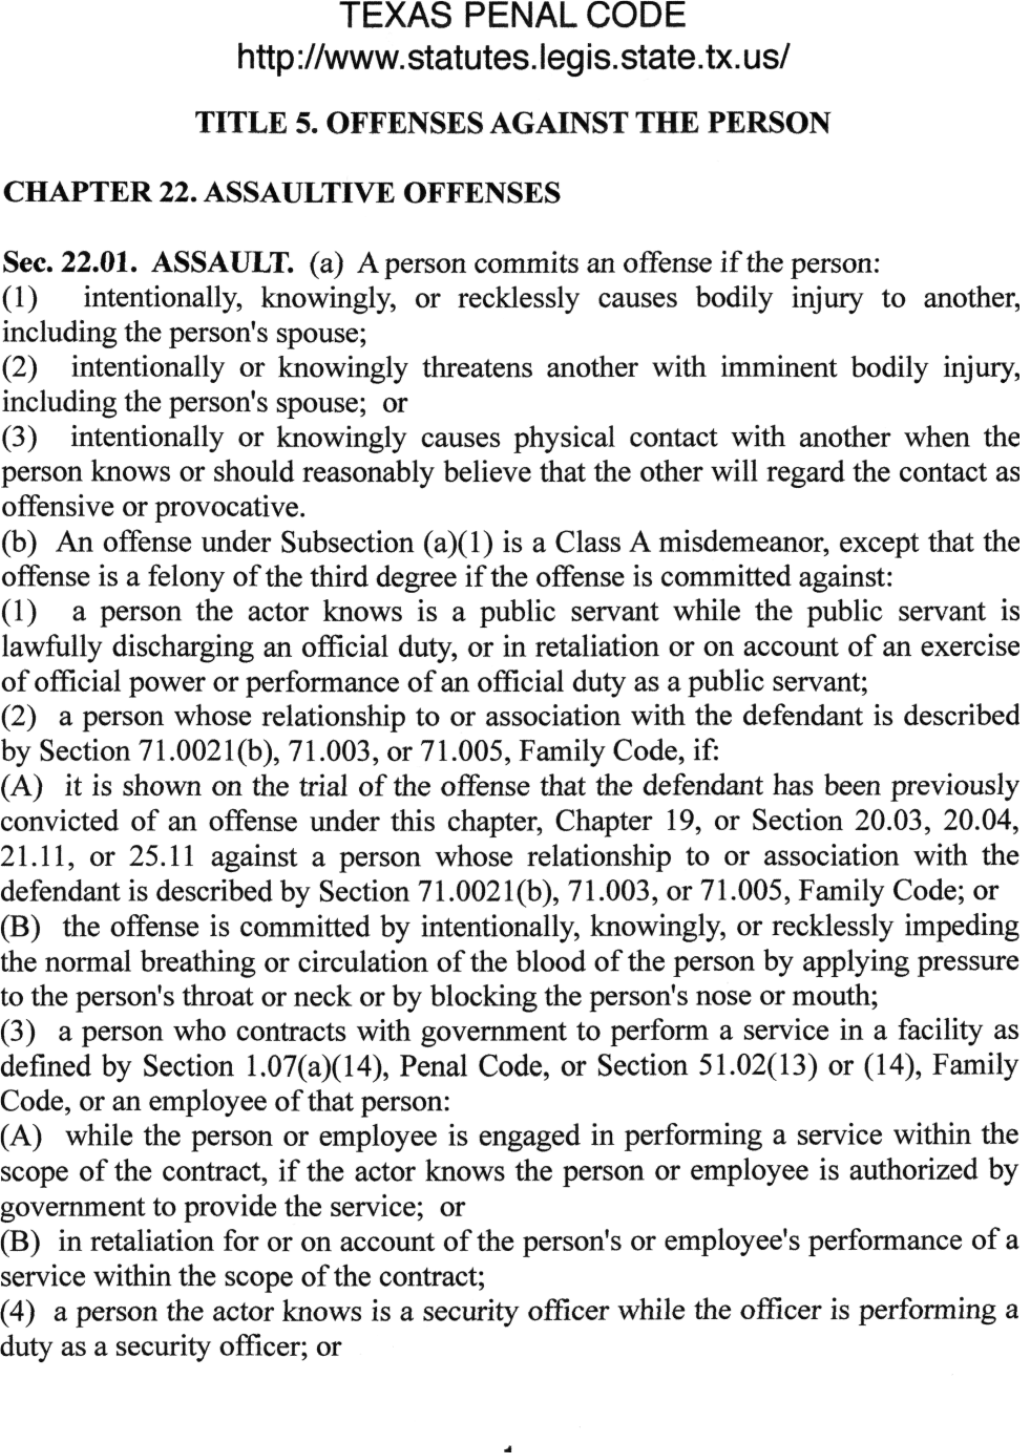 Title 5. Offenses Against the Person